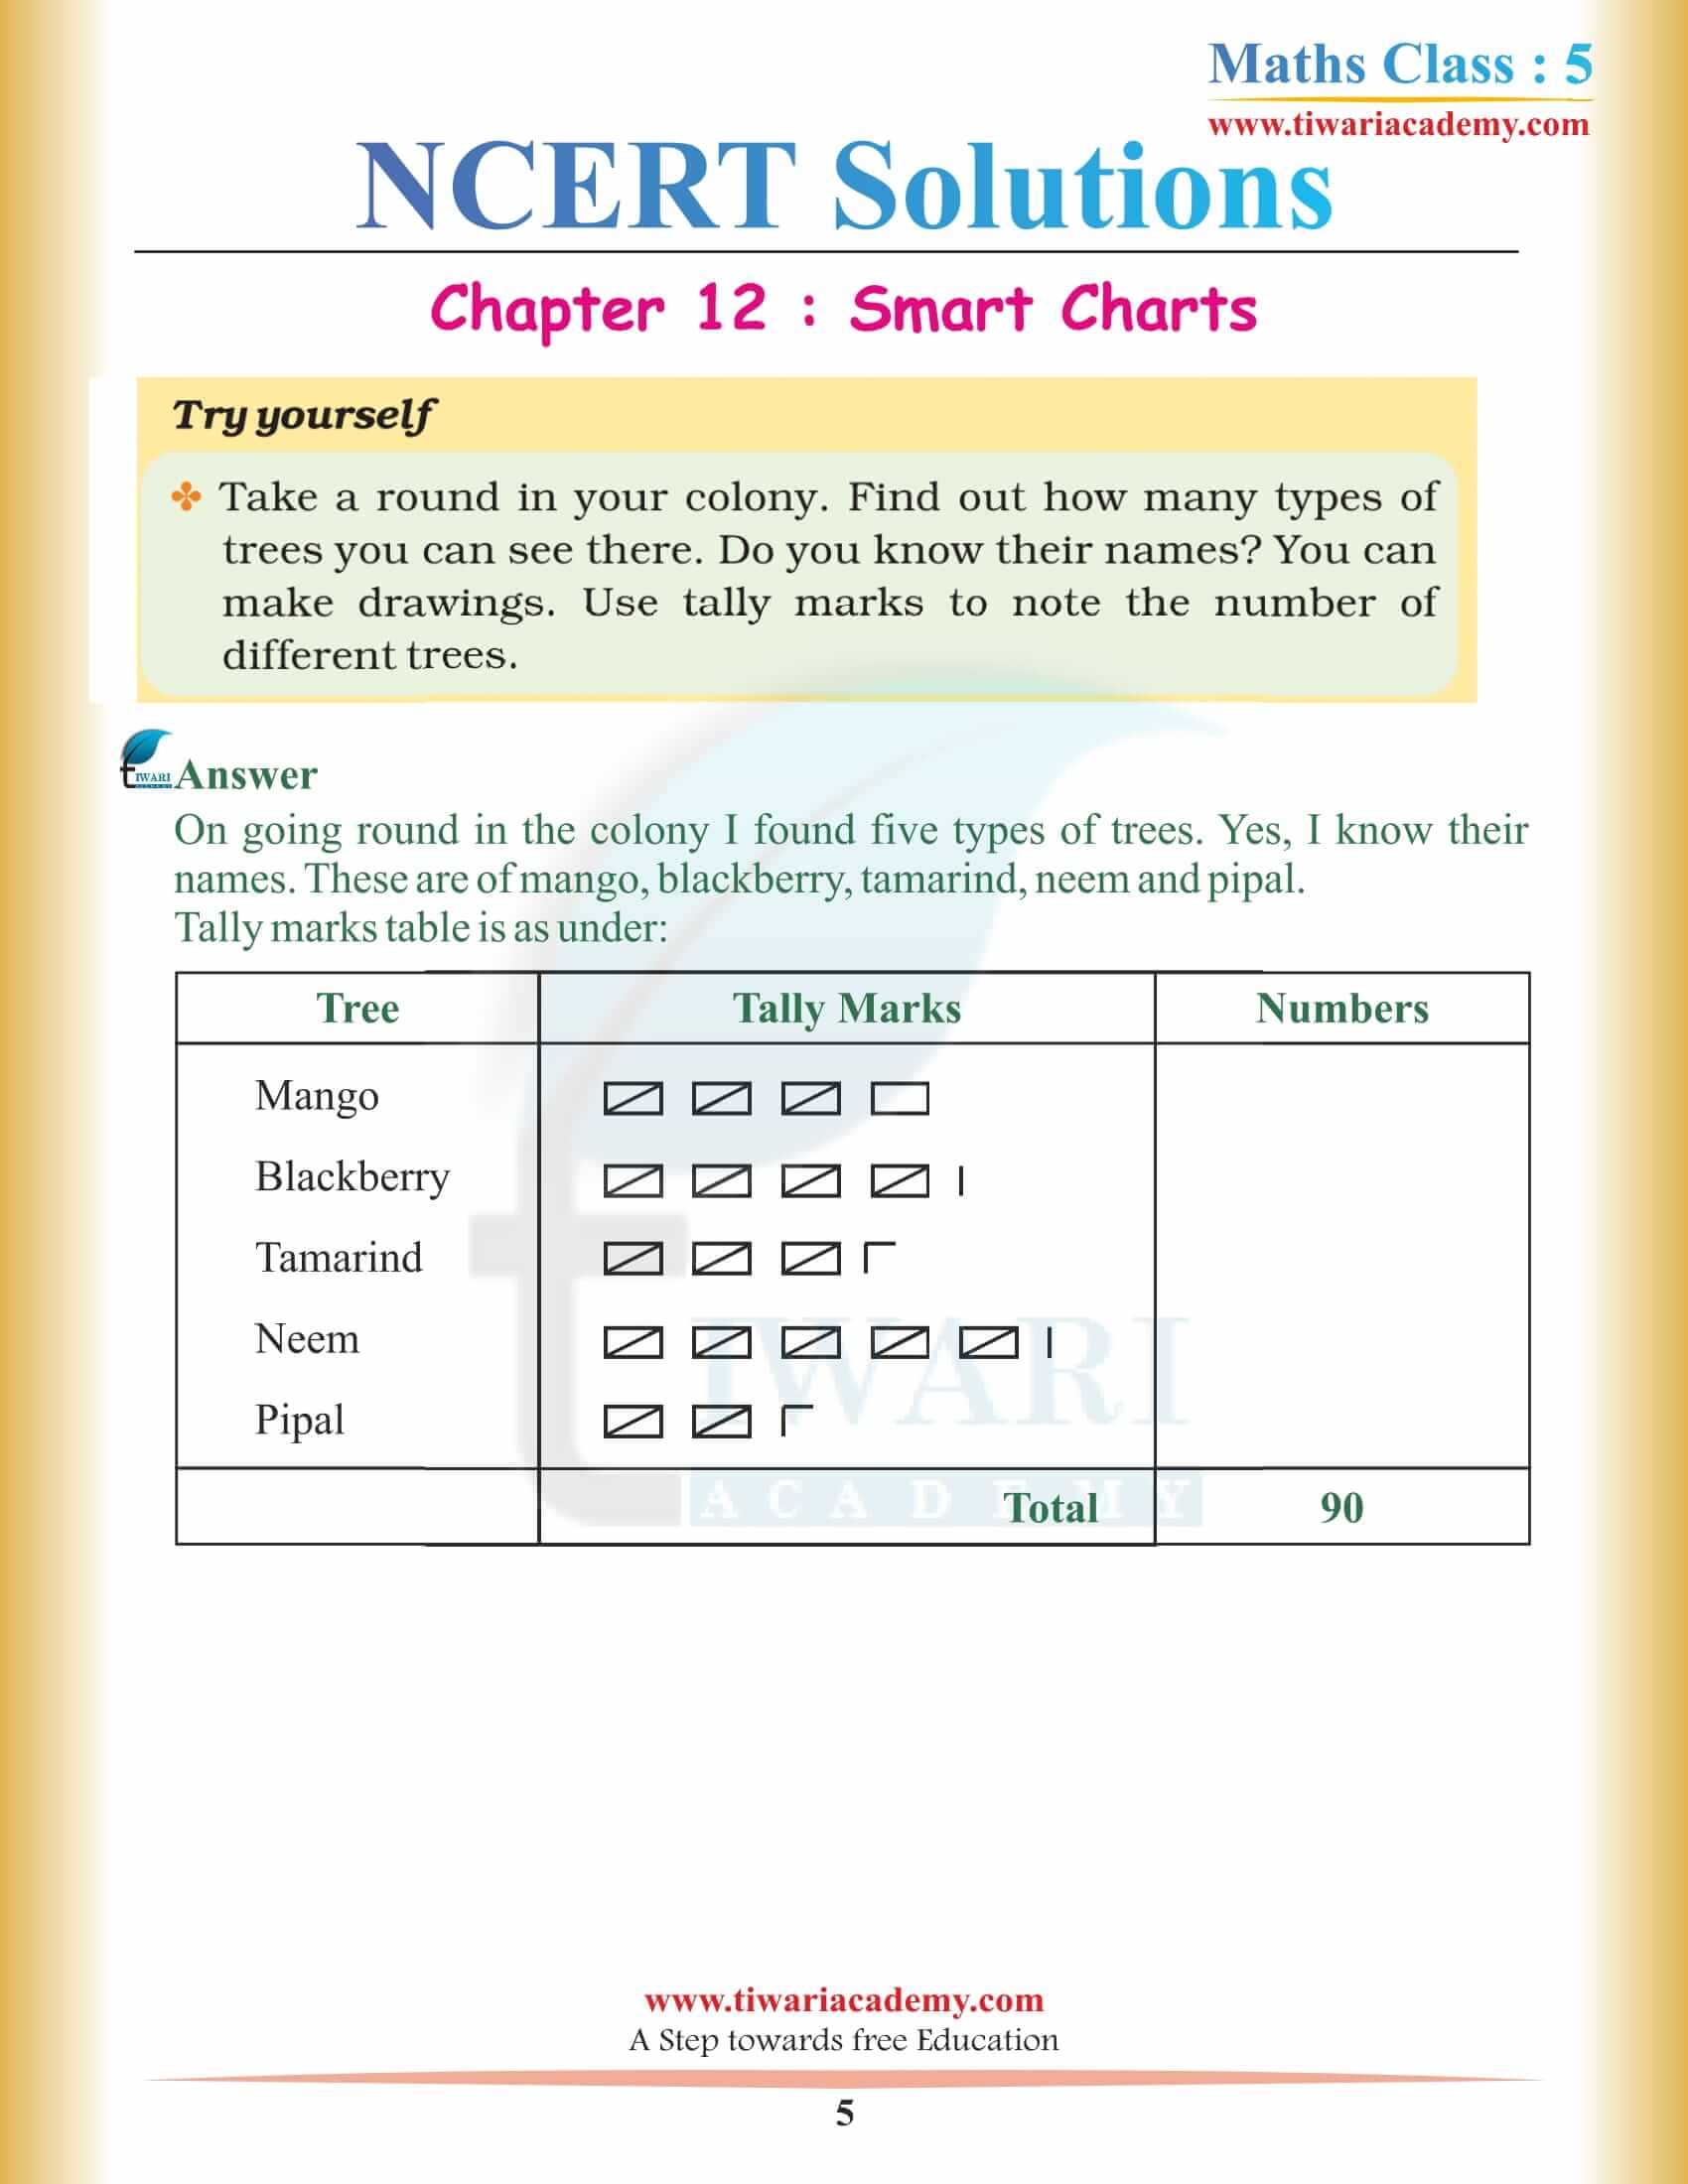 NCERT Solutions for Class 5 Maths Chapter 12 free download